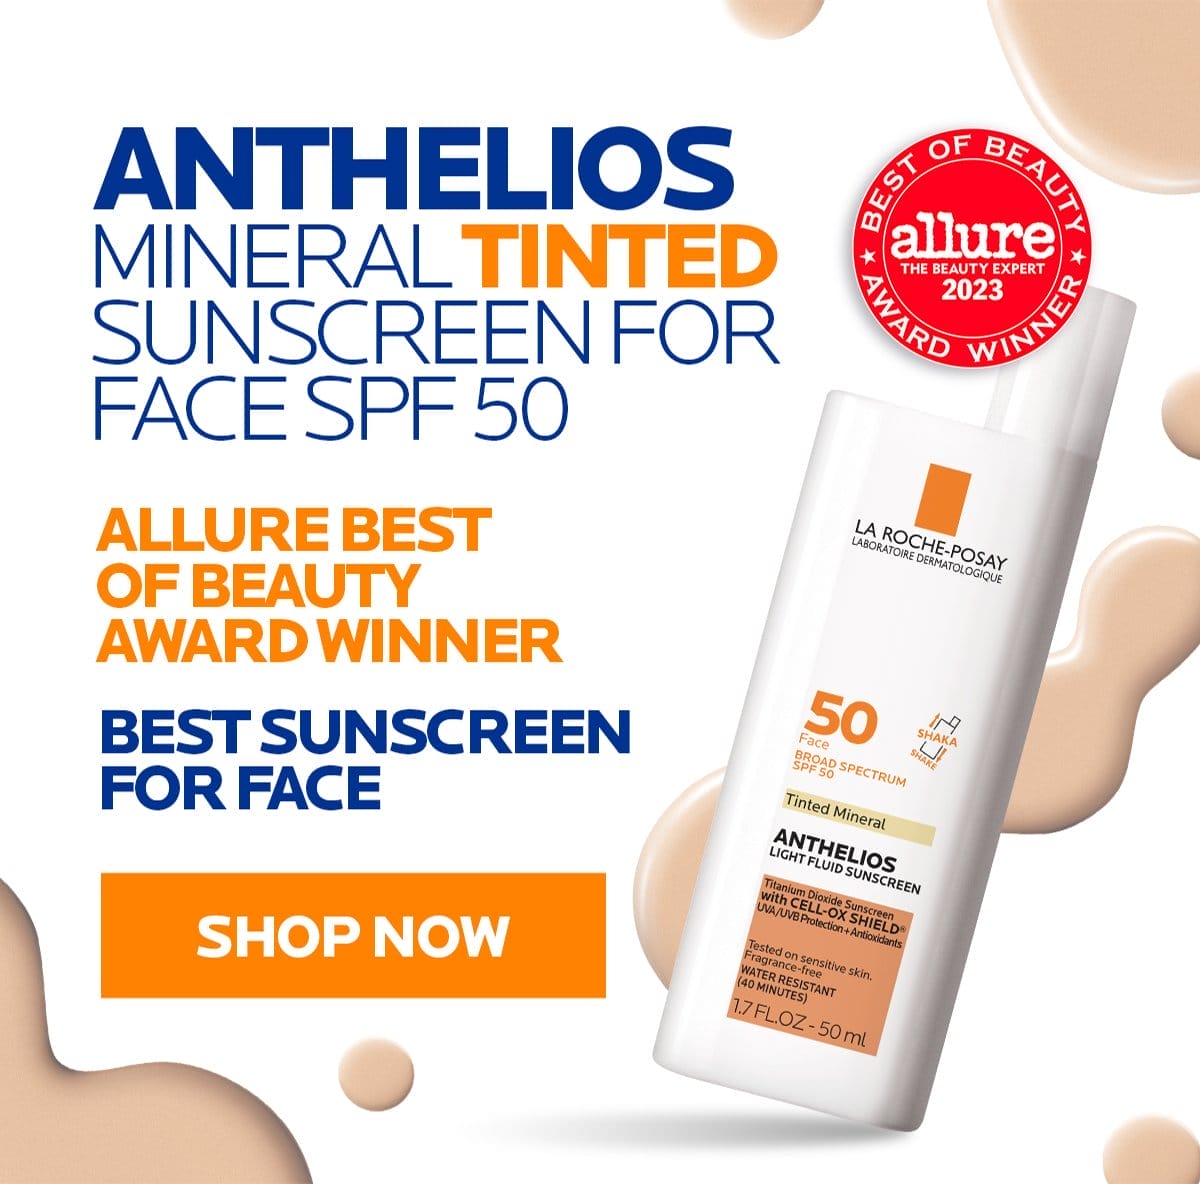 ANTHELIOS MINERAL TINTED SUNSCREEN | ALLURE BEST OF BEAUTY WINNER! SHOP NOW